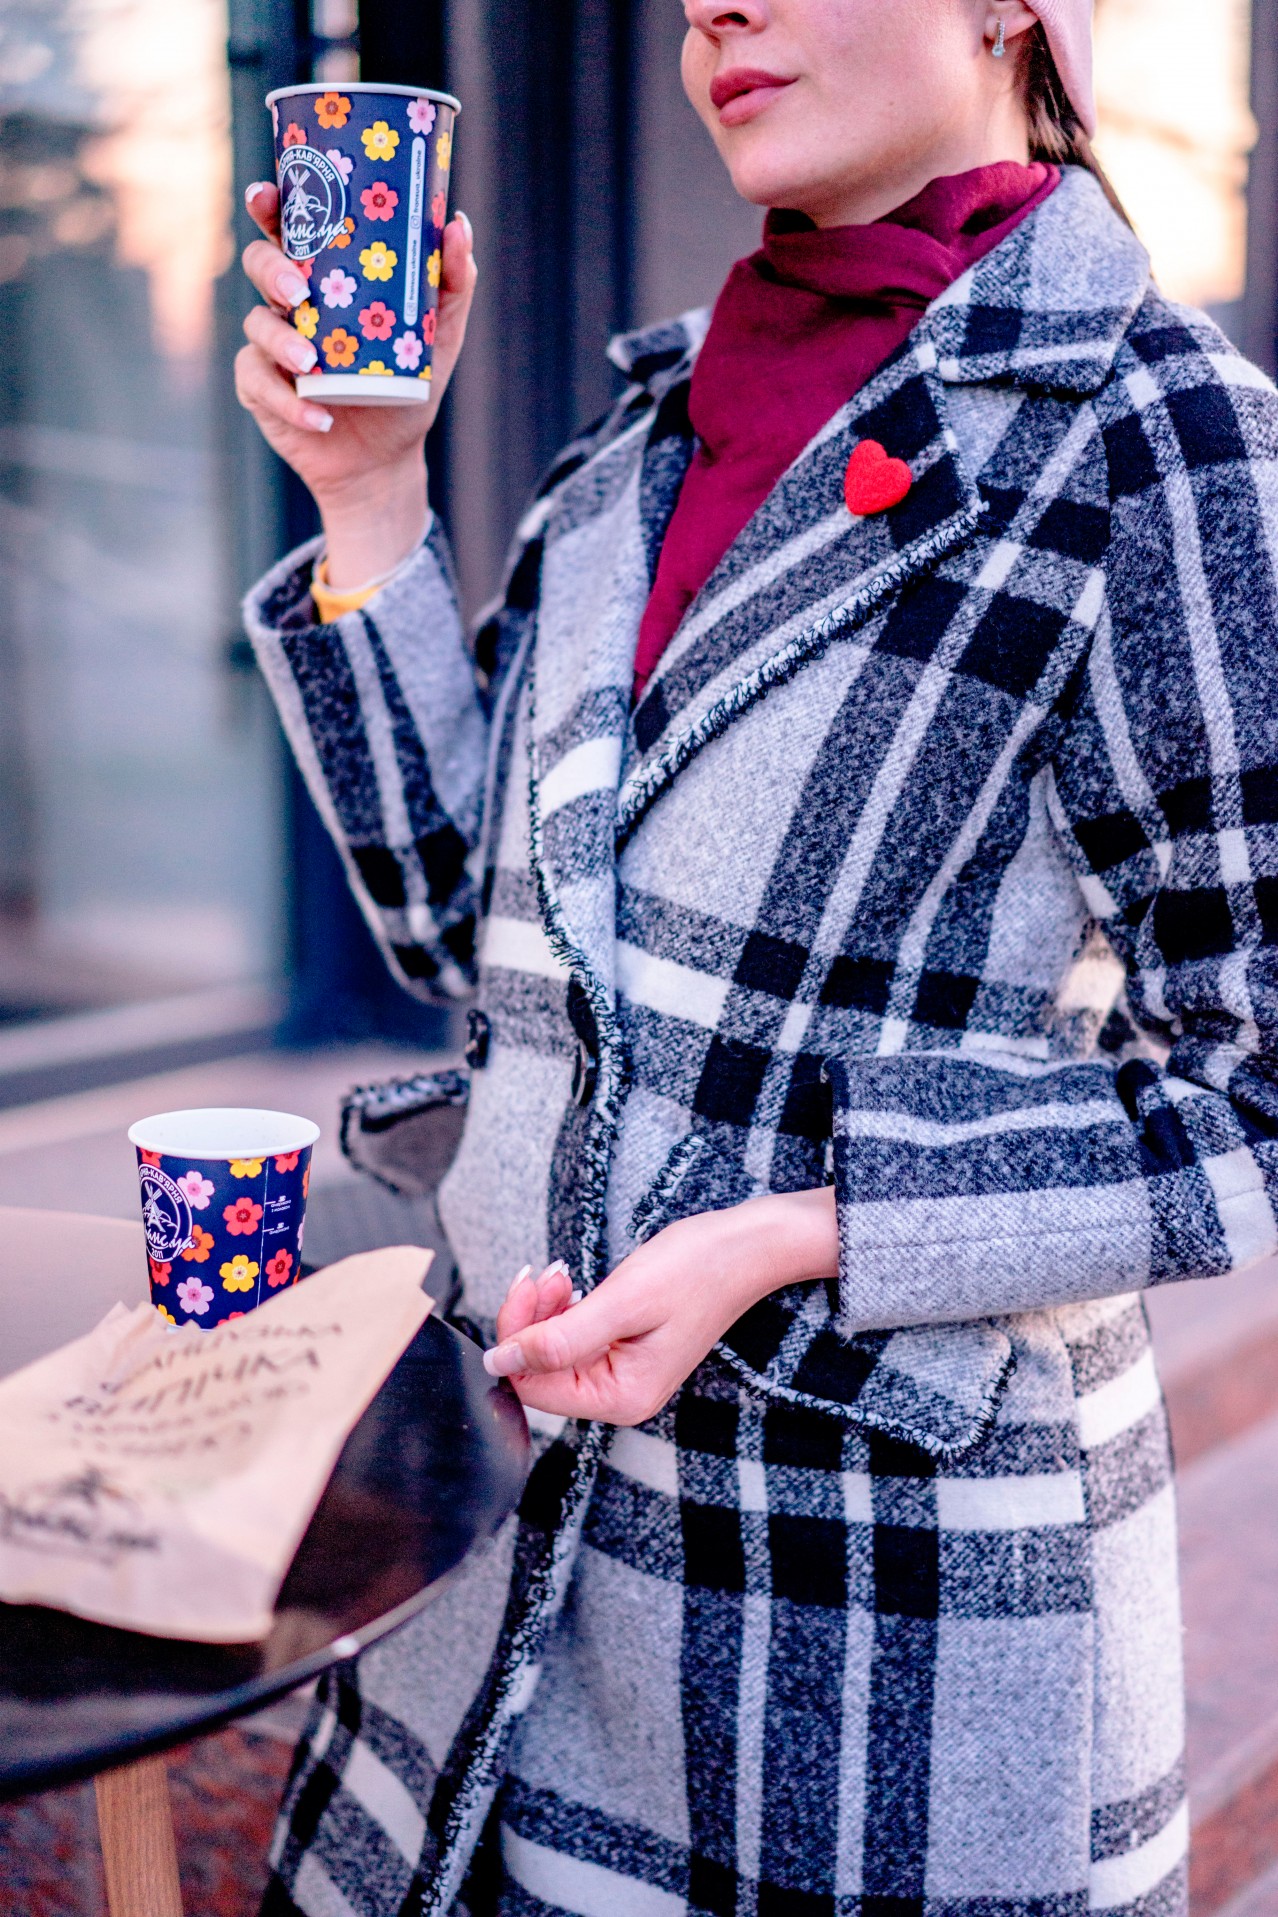 Woman in coat drinking coffee outdoors